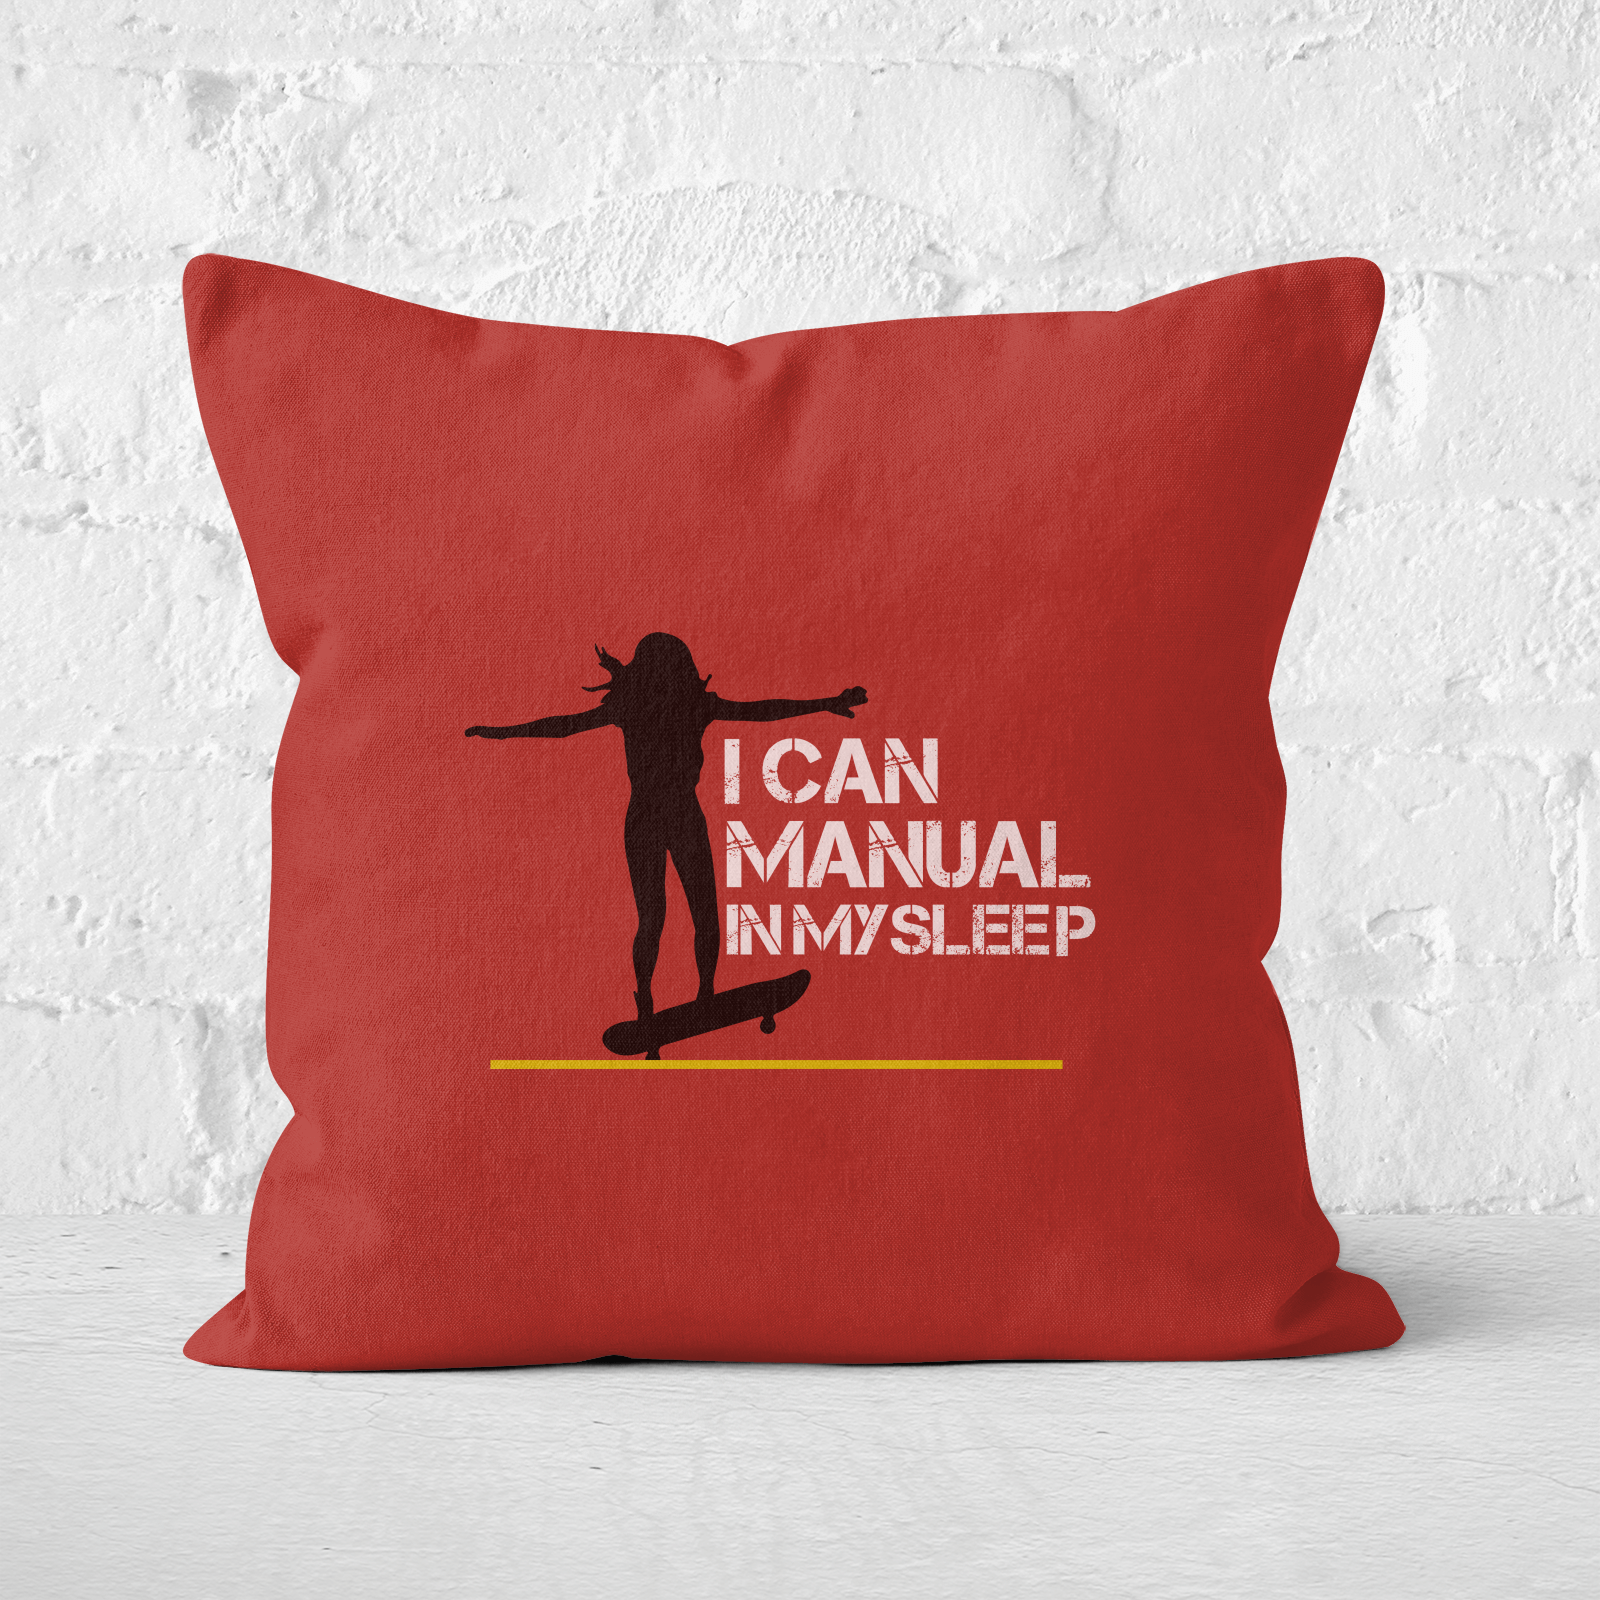 I Can Manual In My Sleep Square Cushion - 60x60cm - Soft Touch